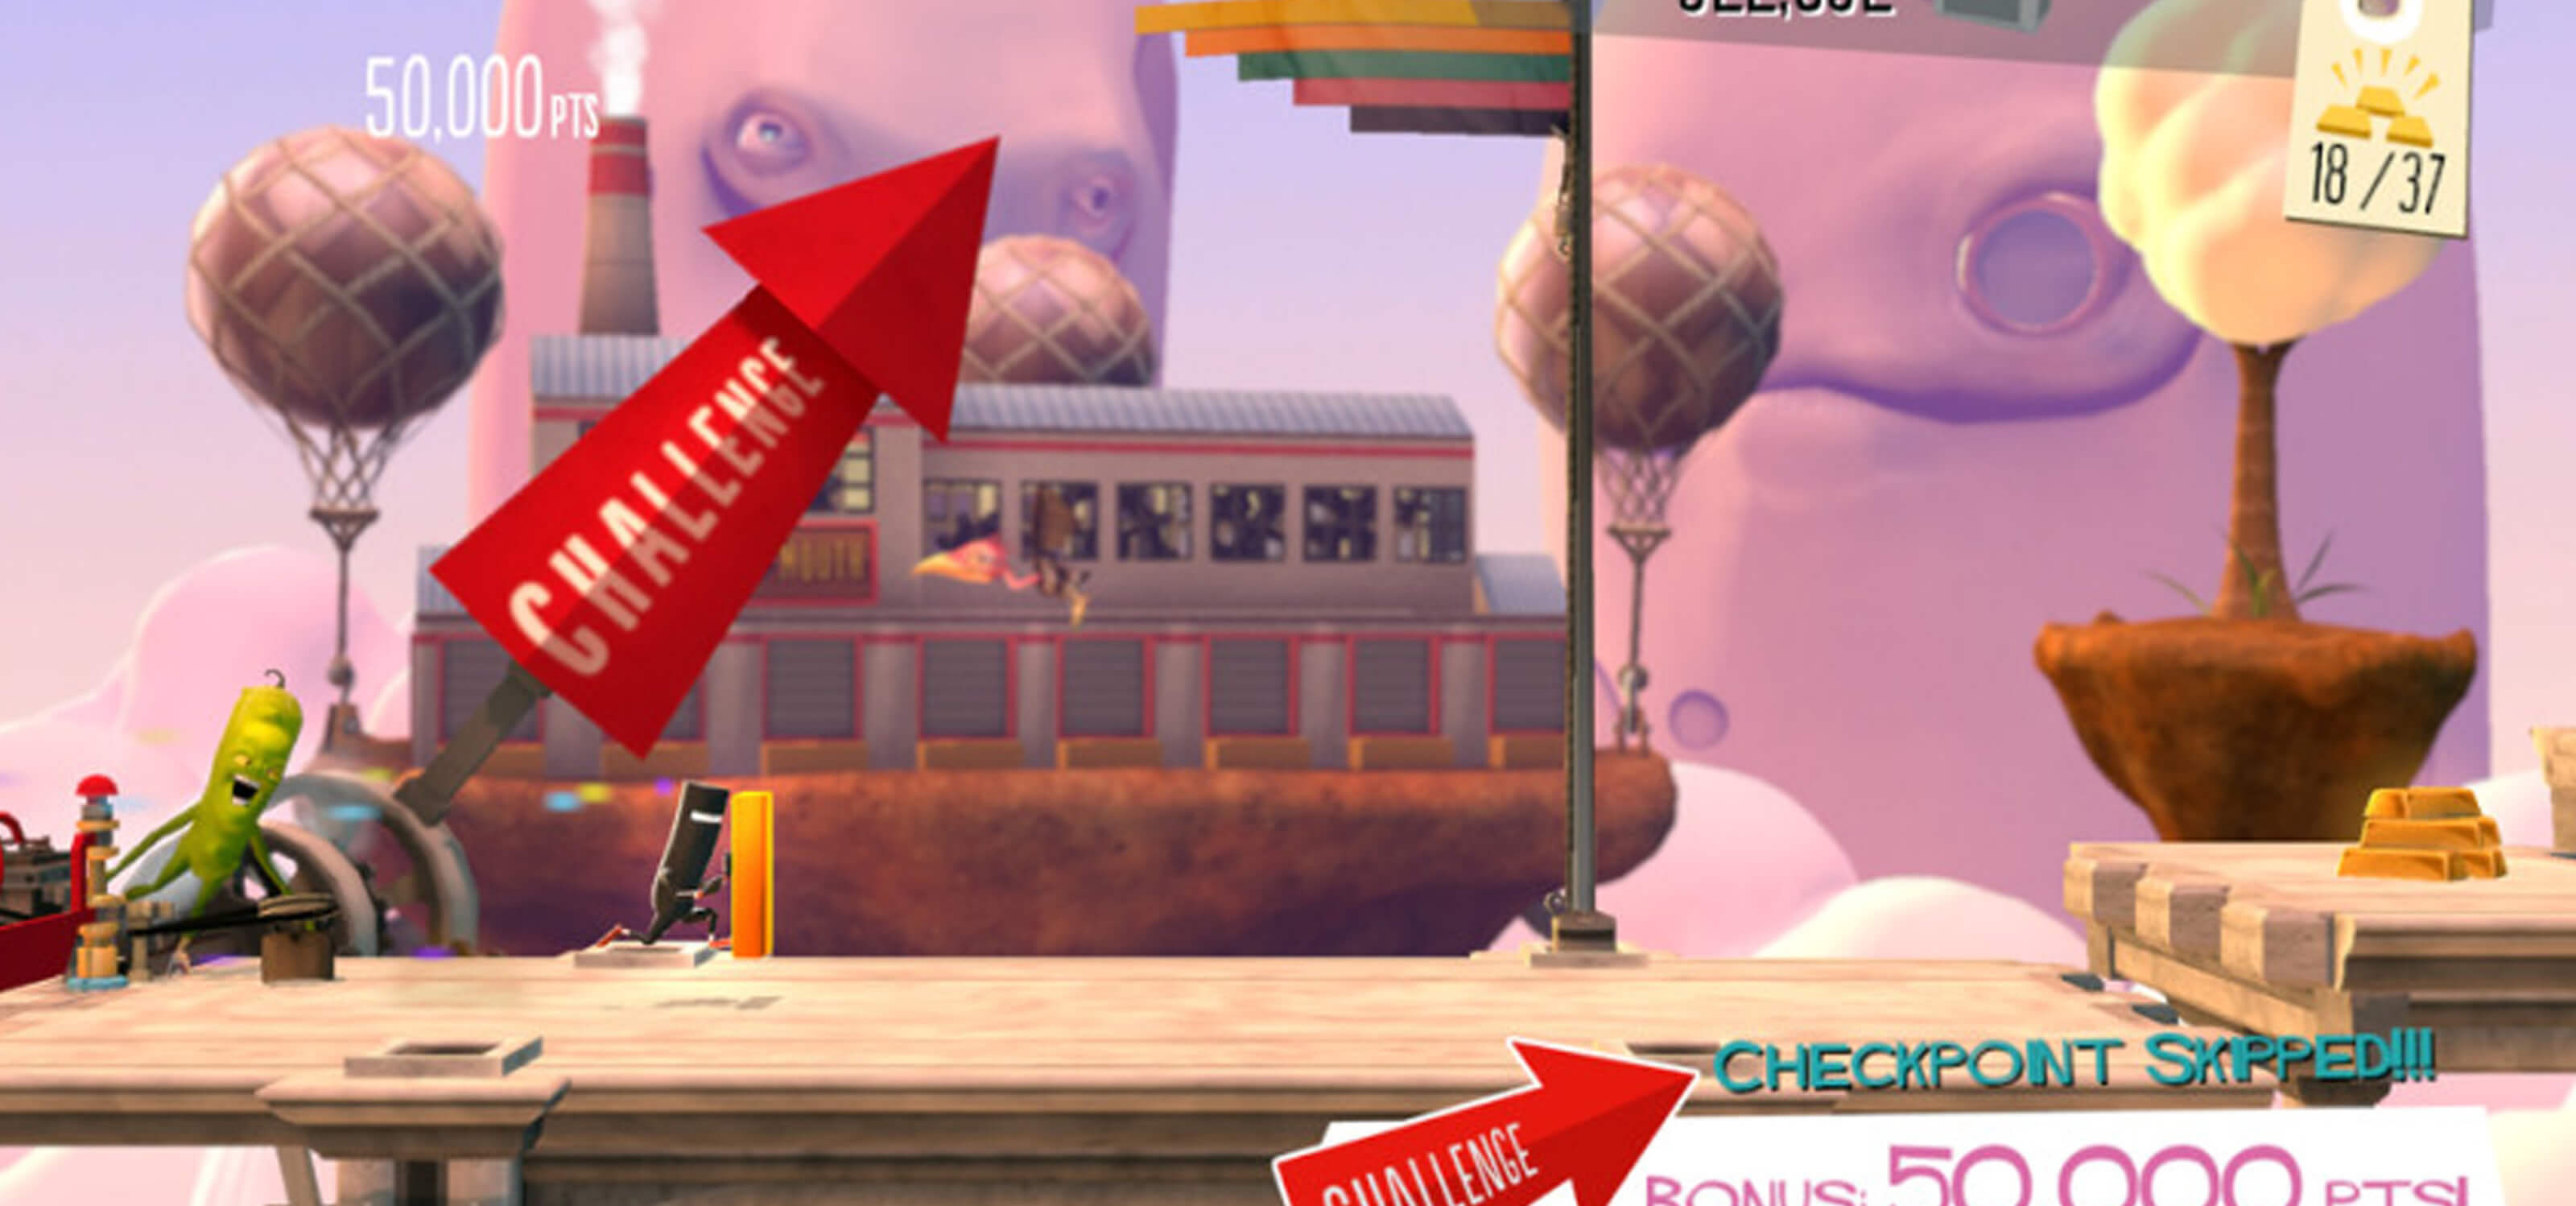 Screenshot of the Cumulonimbus Conundrum level from Bit.Trip Runner 2, where buildings are suspended in air from balloons